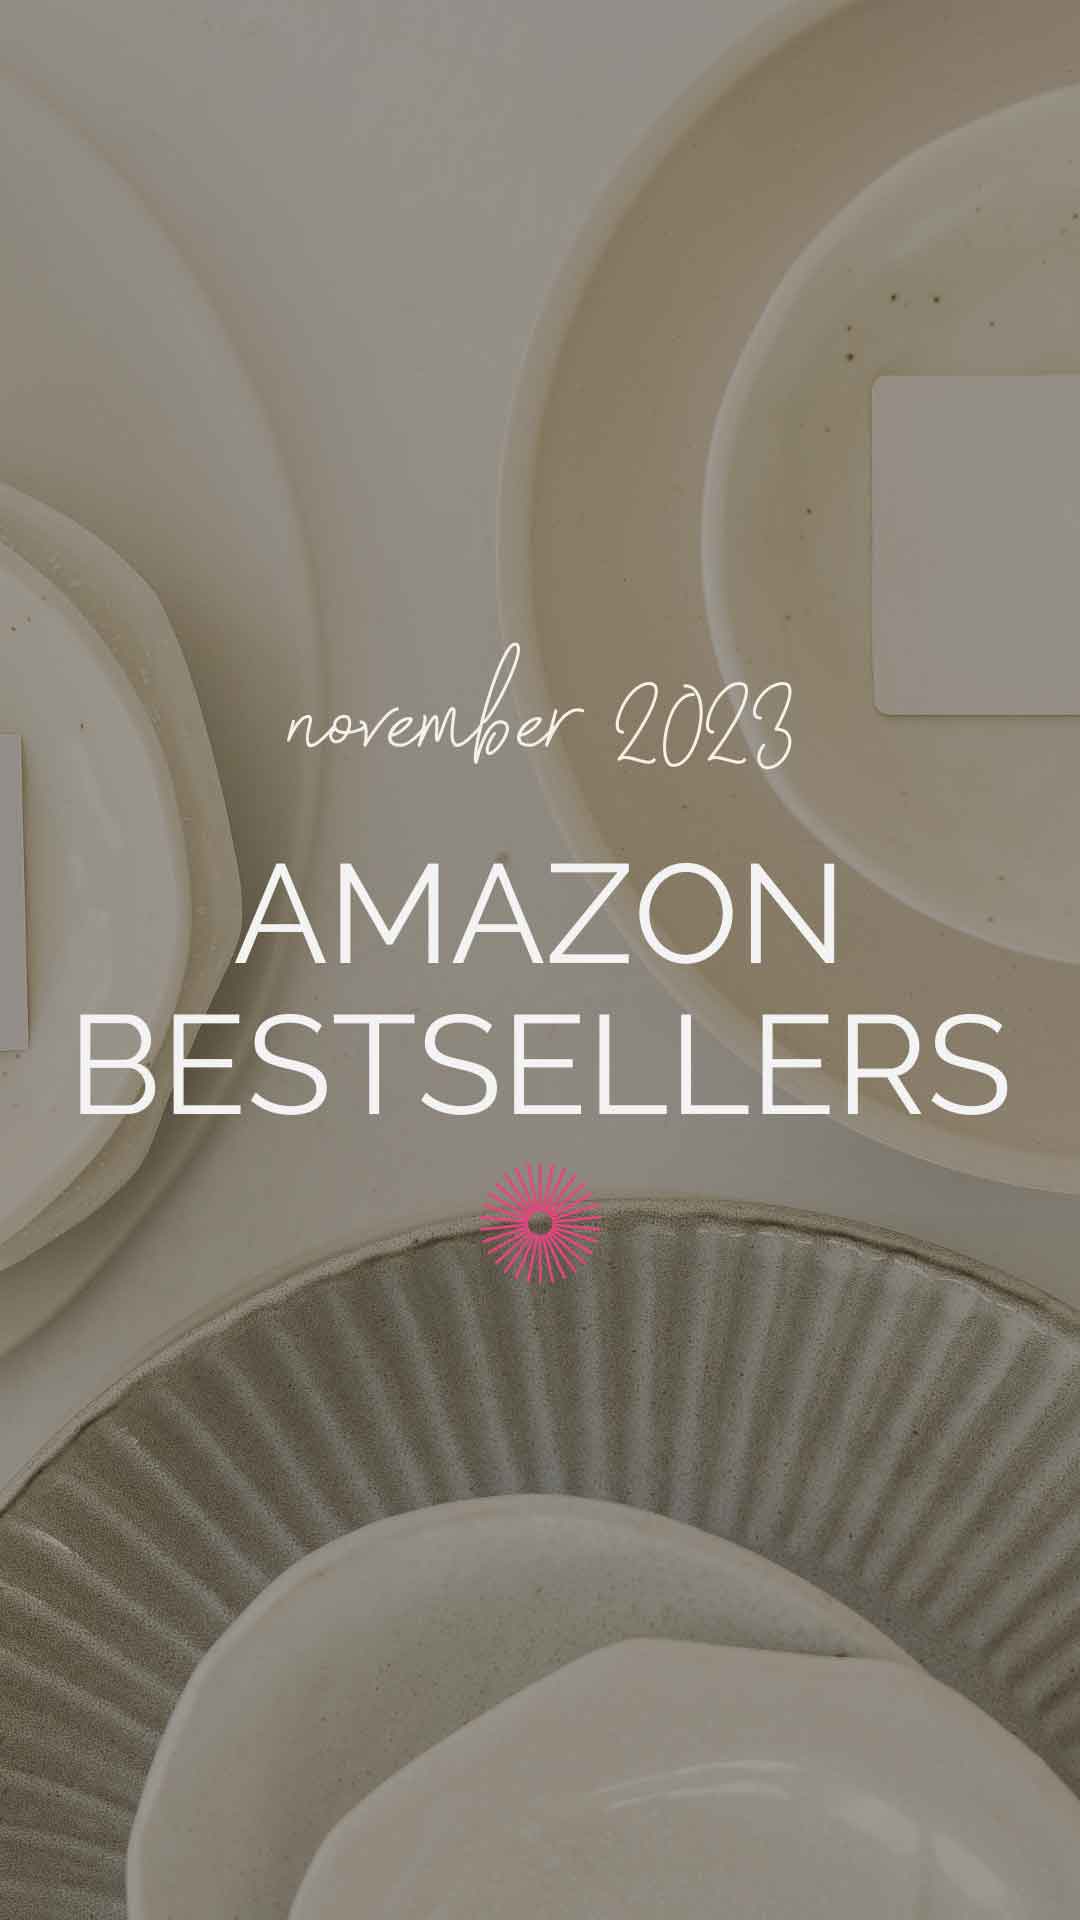 Beige plates in the background with text overlay "November 2023 Amazon Bestsellers".